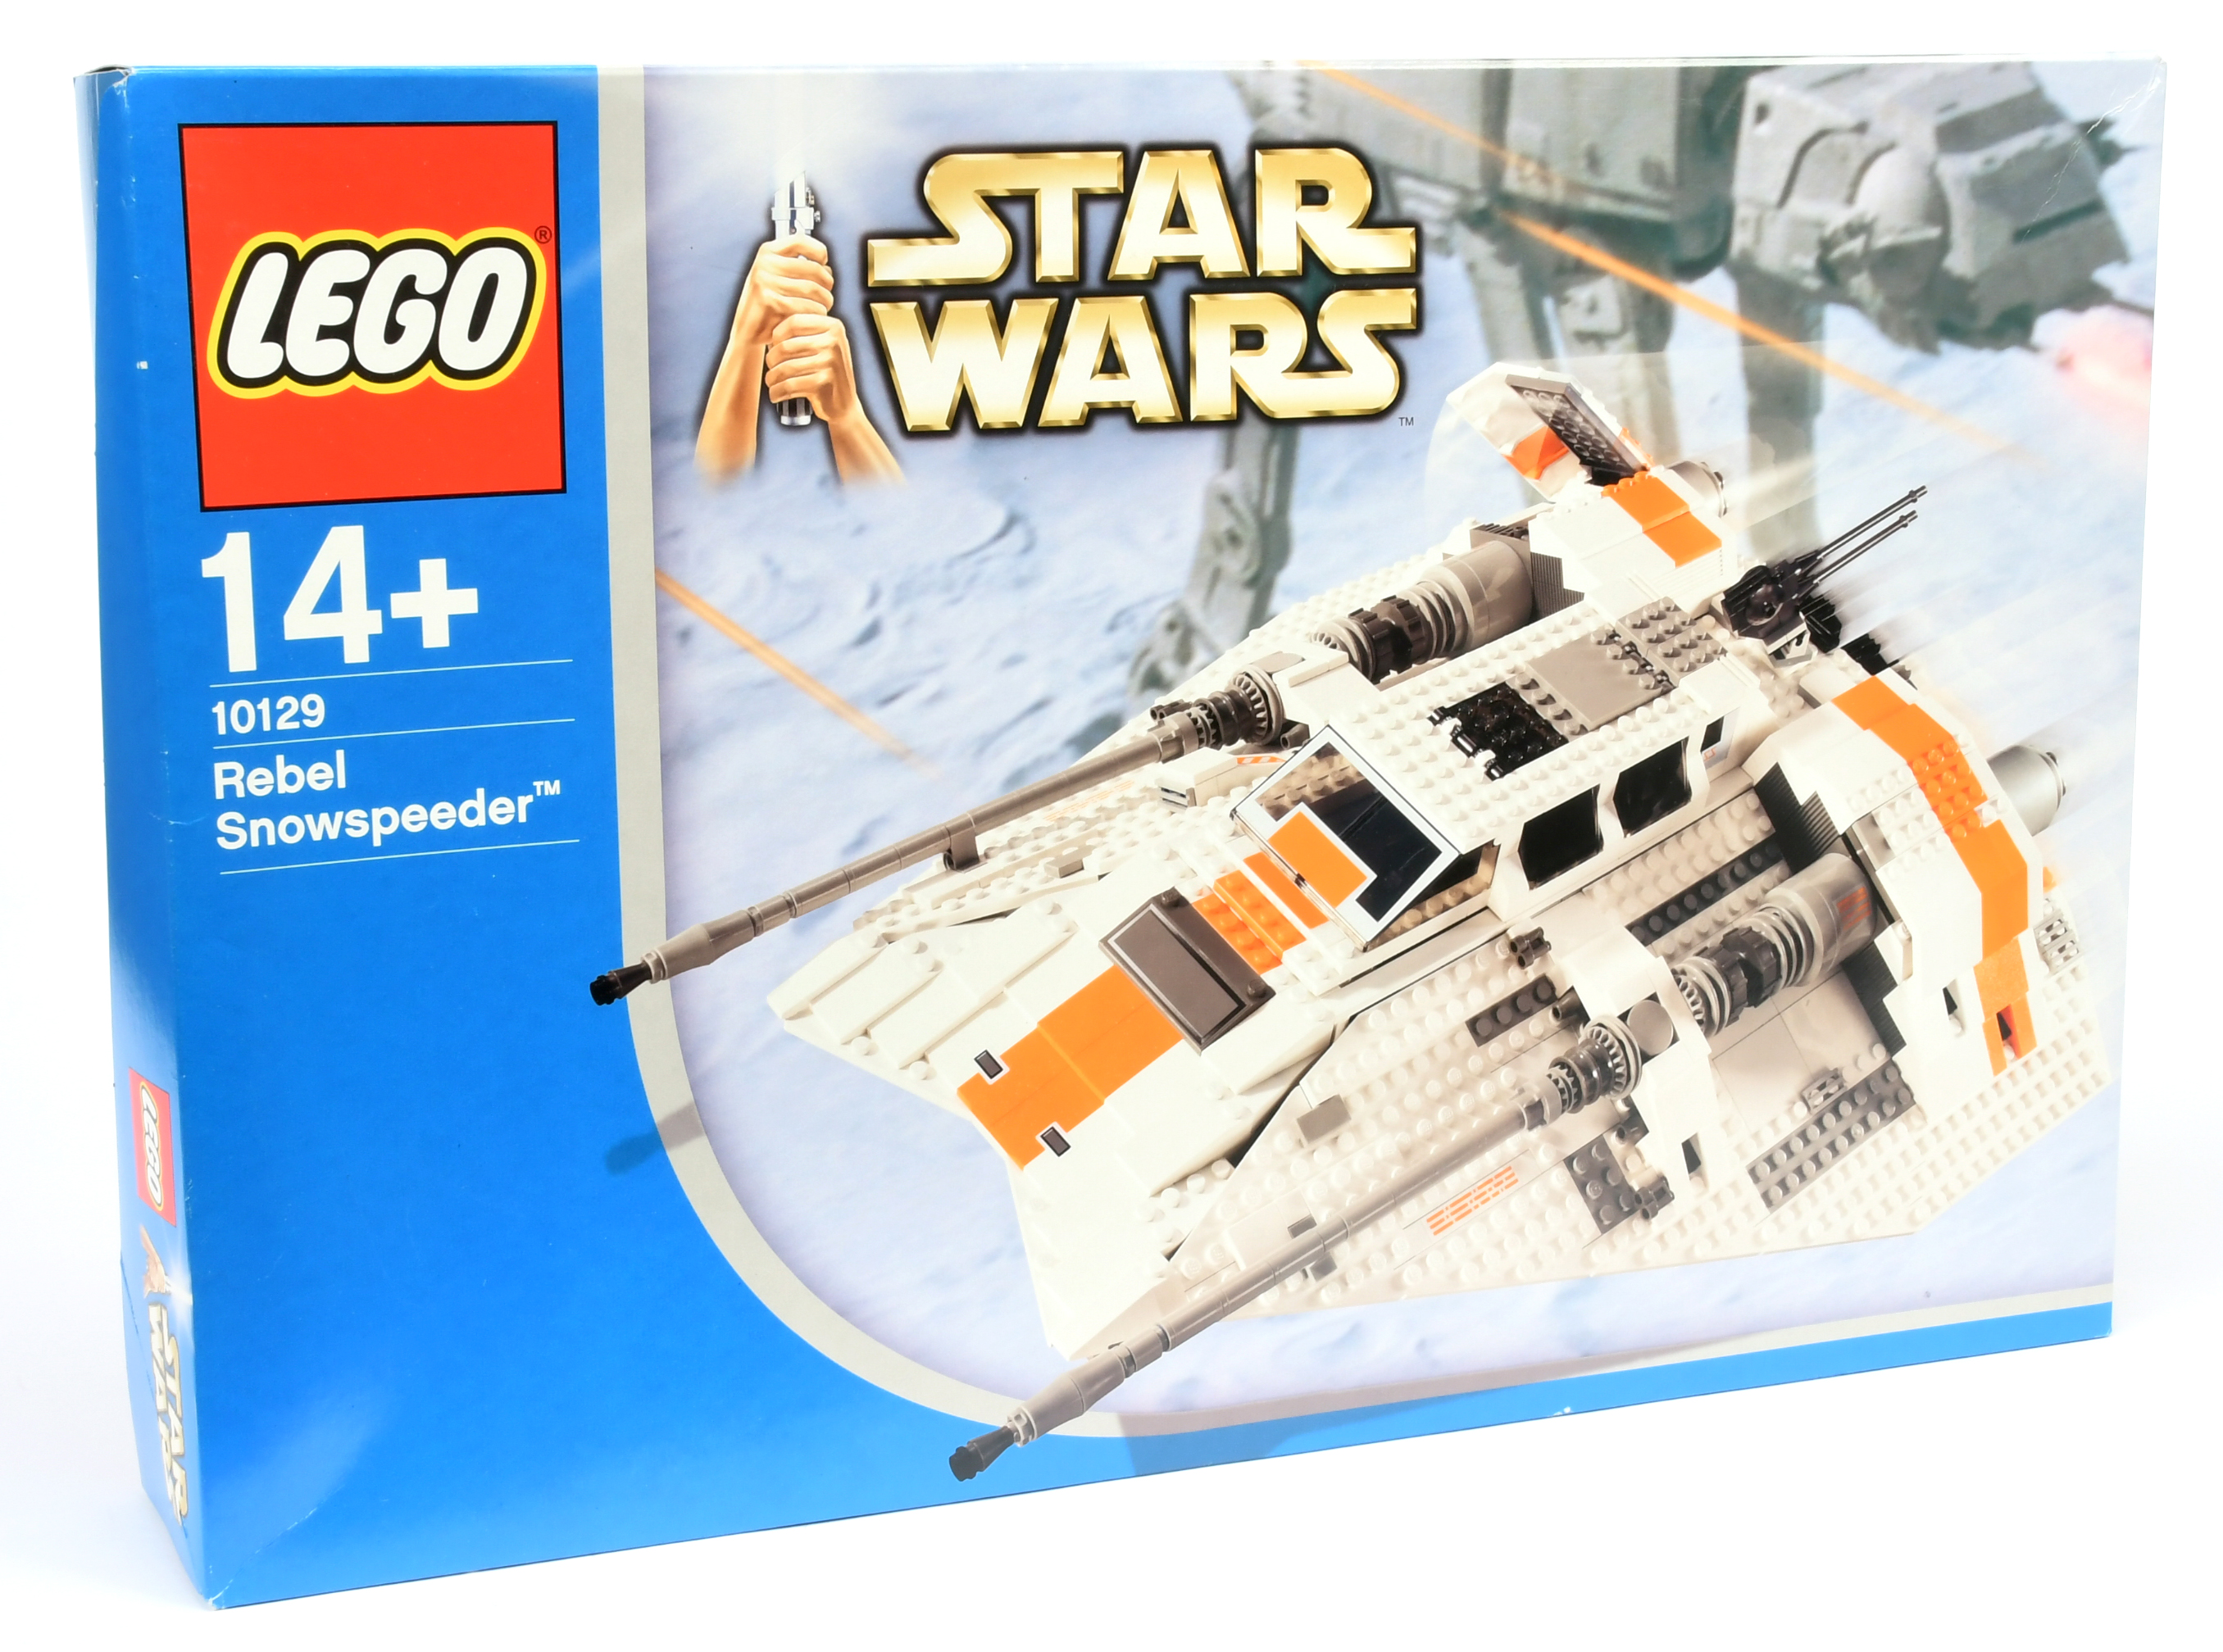 Lego 10129 Rebel Snowspeeder - Blue Box issue from 2004, within Excellent Plus sealed packaging. ...